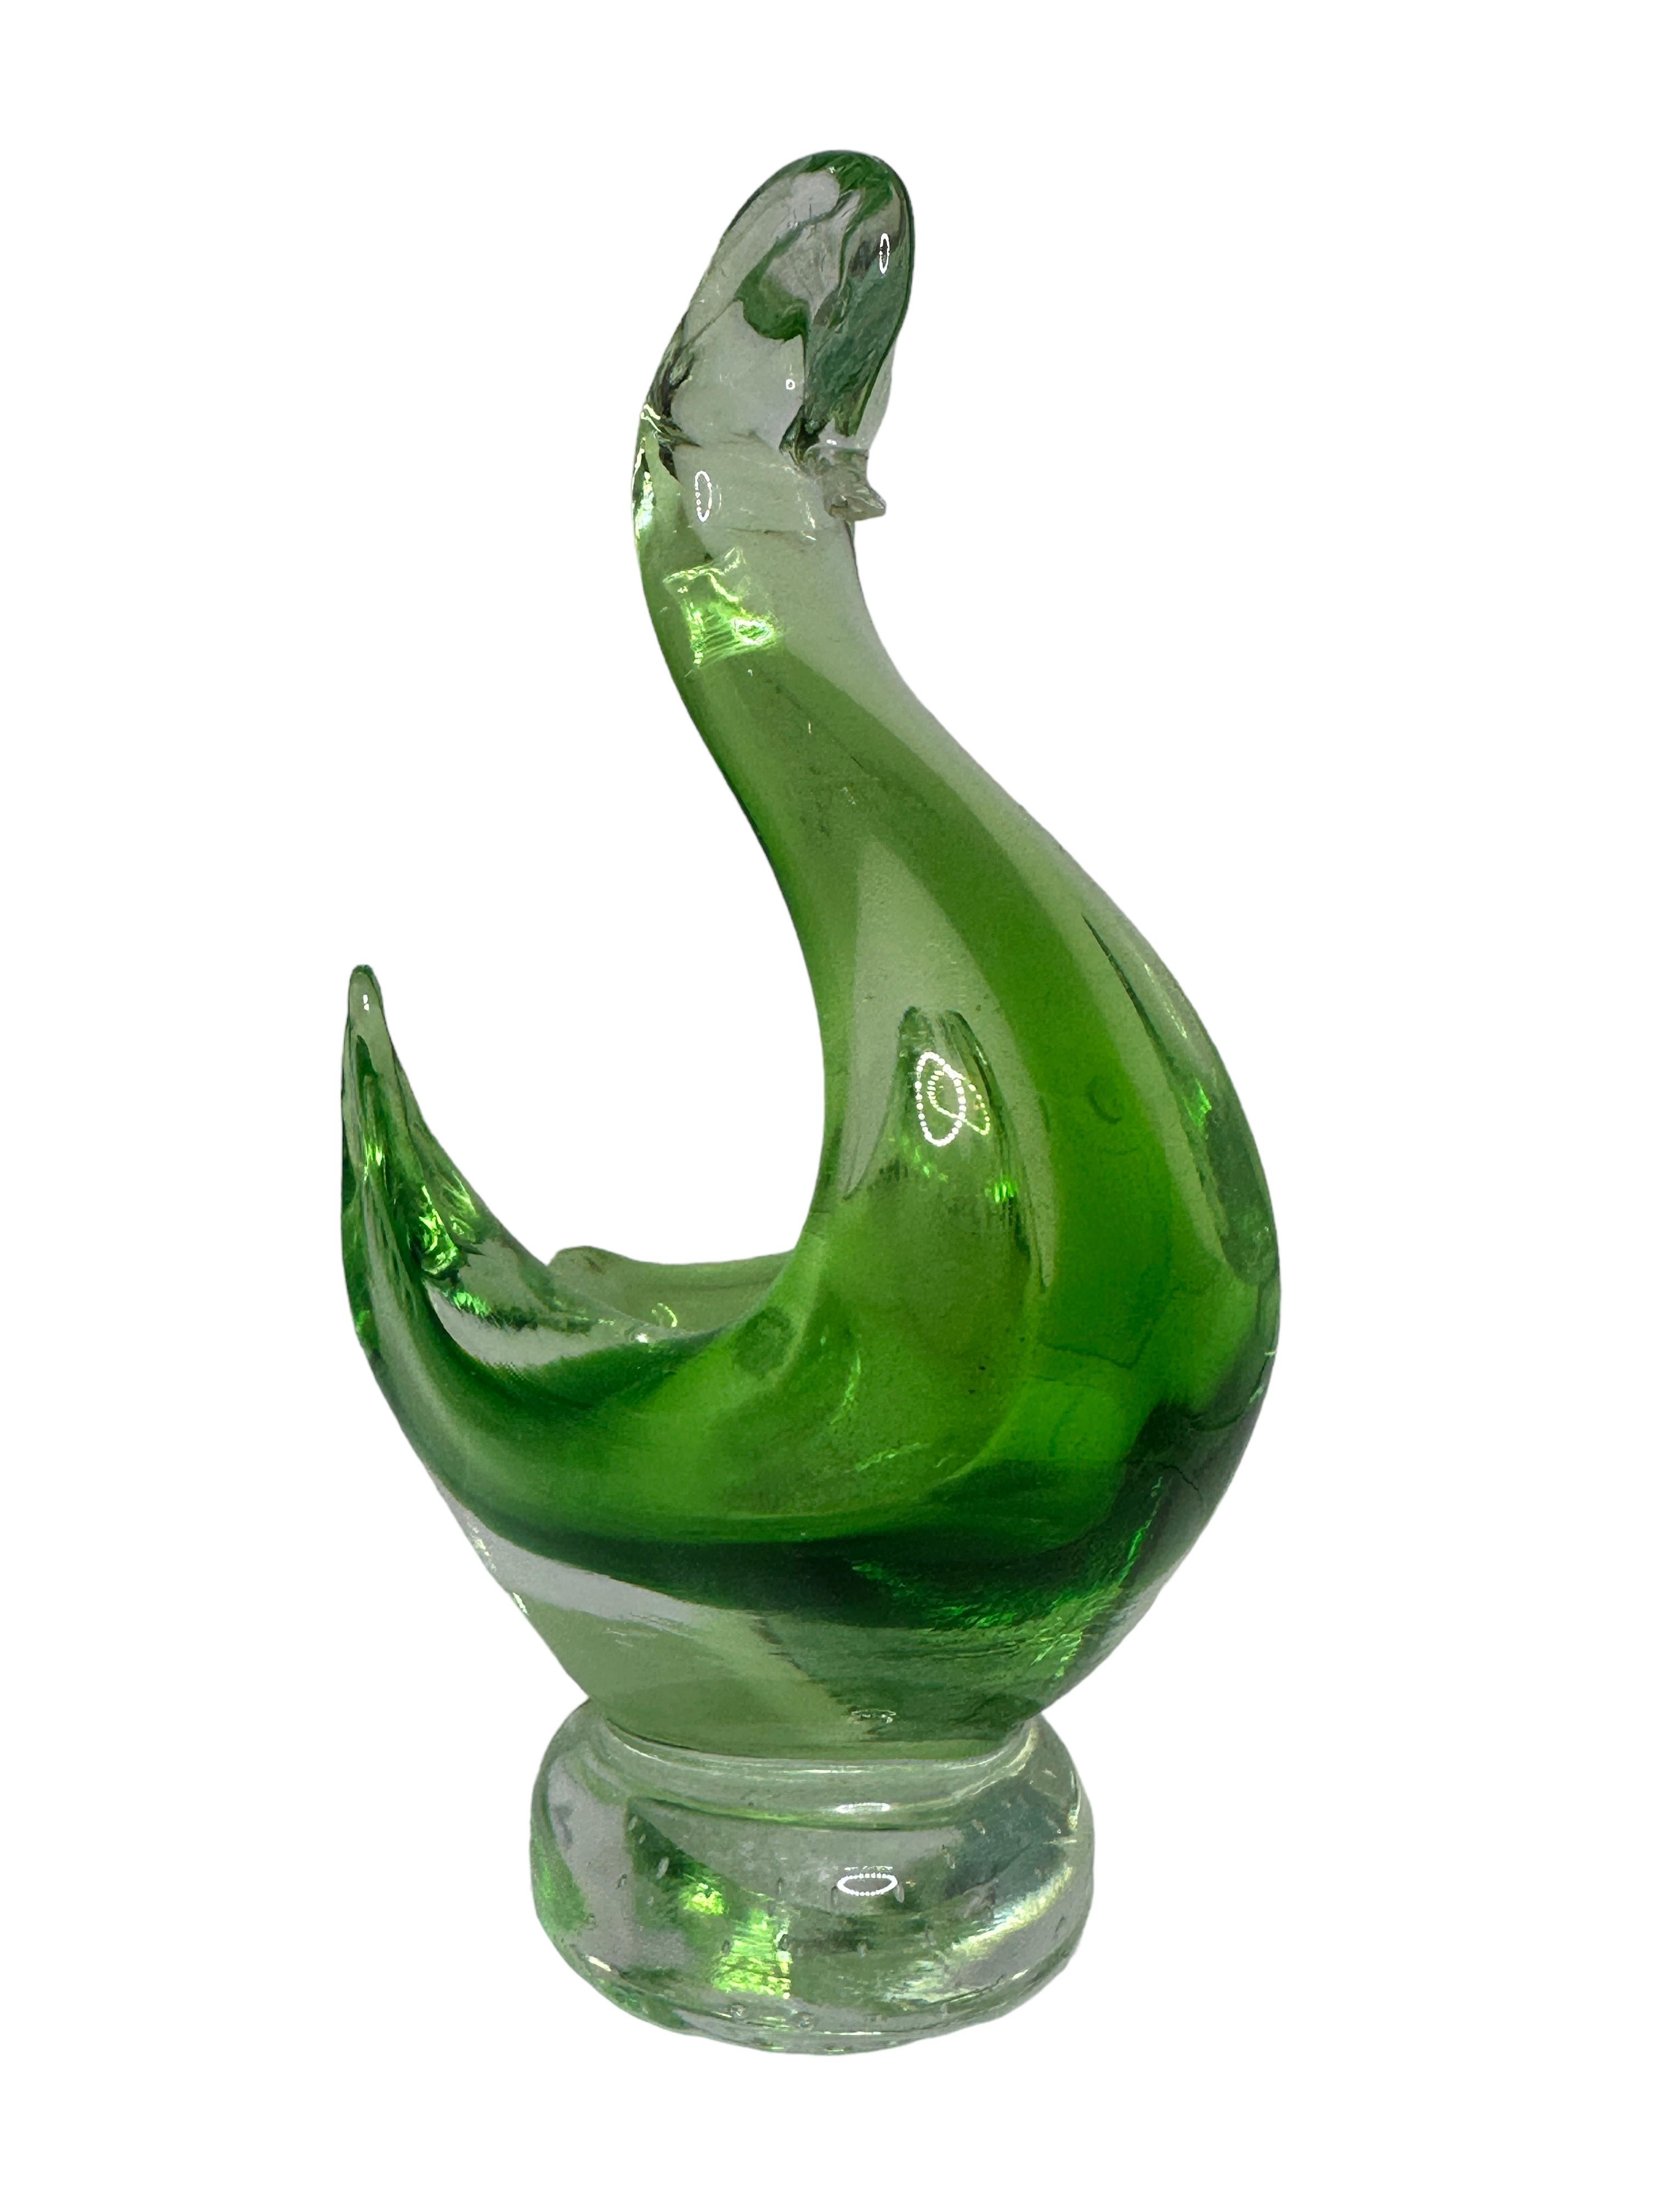 A Murano glass sculpture depicting a swan in clear and green. A nice addition to any room. Made in Venice Italy in the 1980s. found at an Estate Sale in Vienna, Austria.